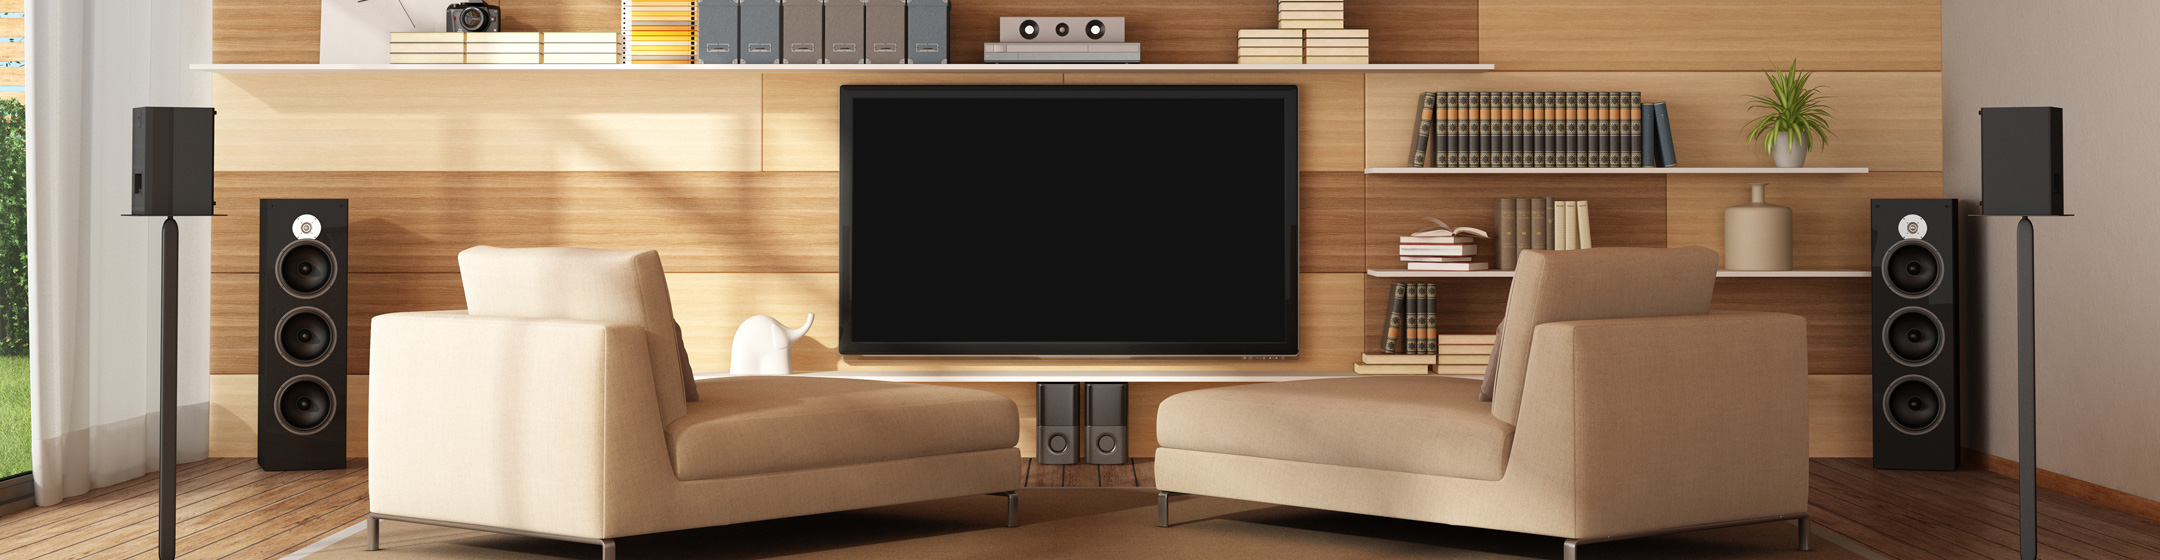 Pic showing a render of a sitting room with a home cinema and speakers in place